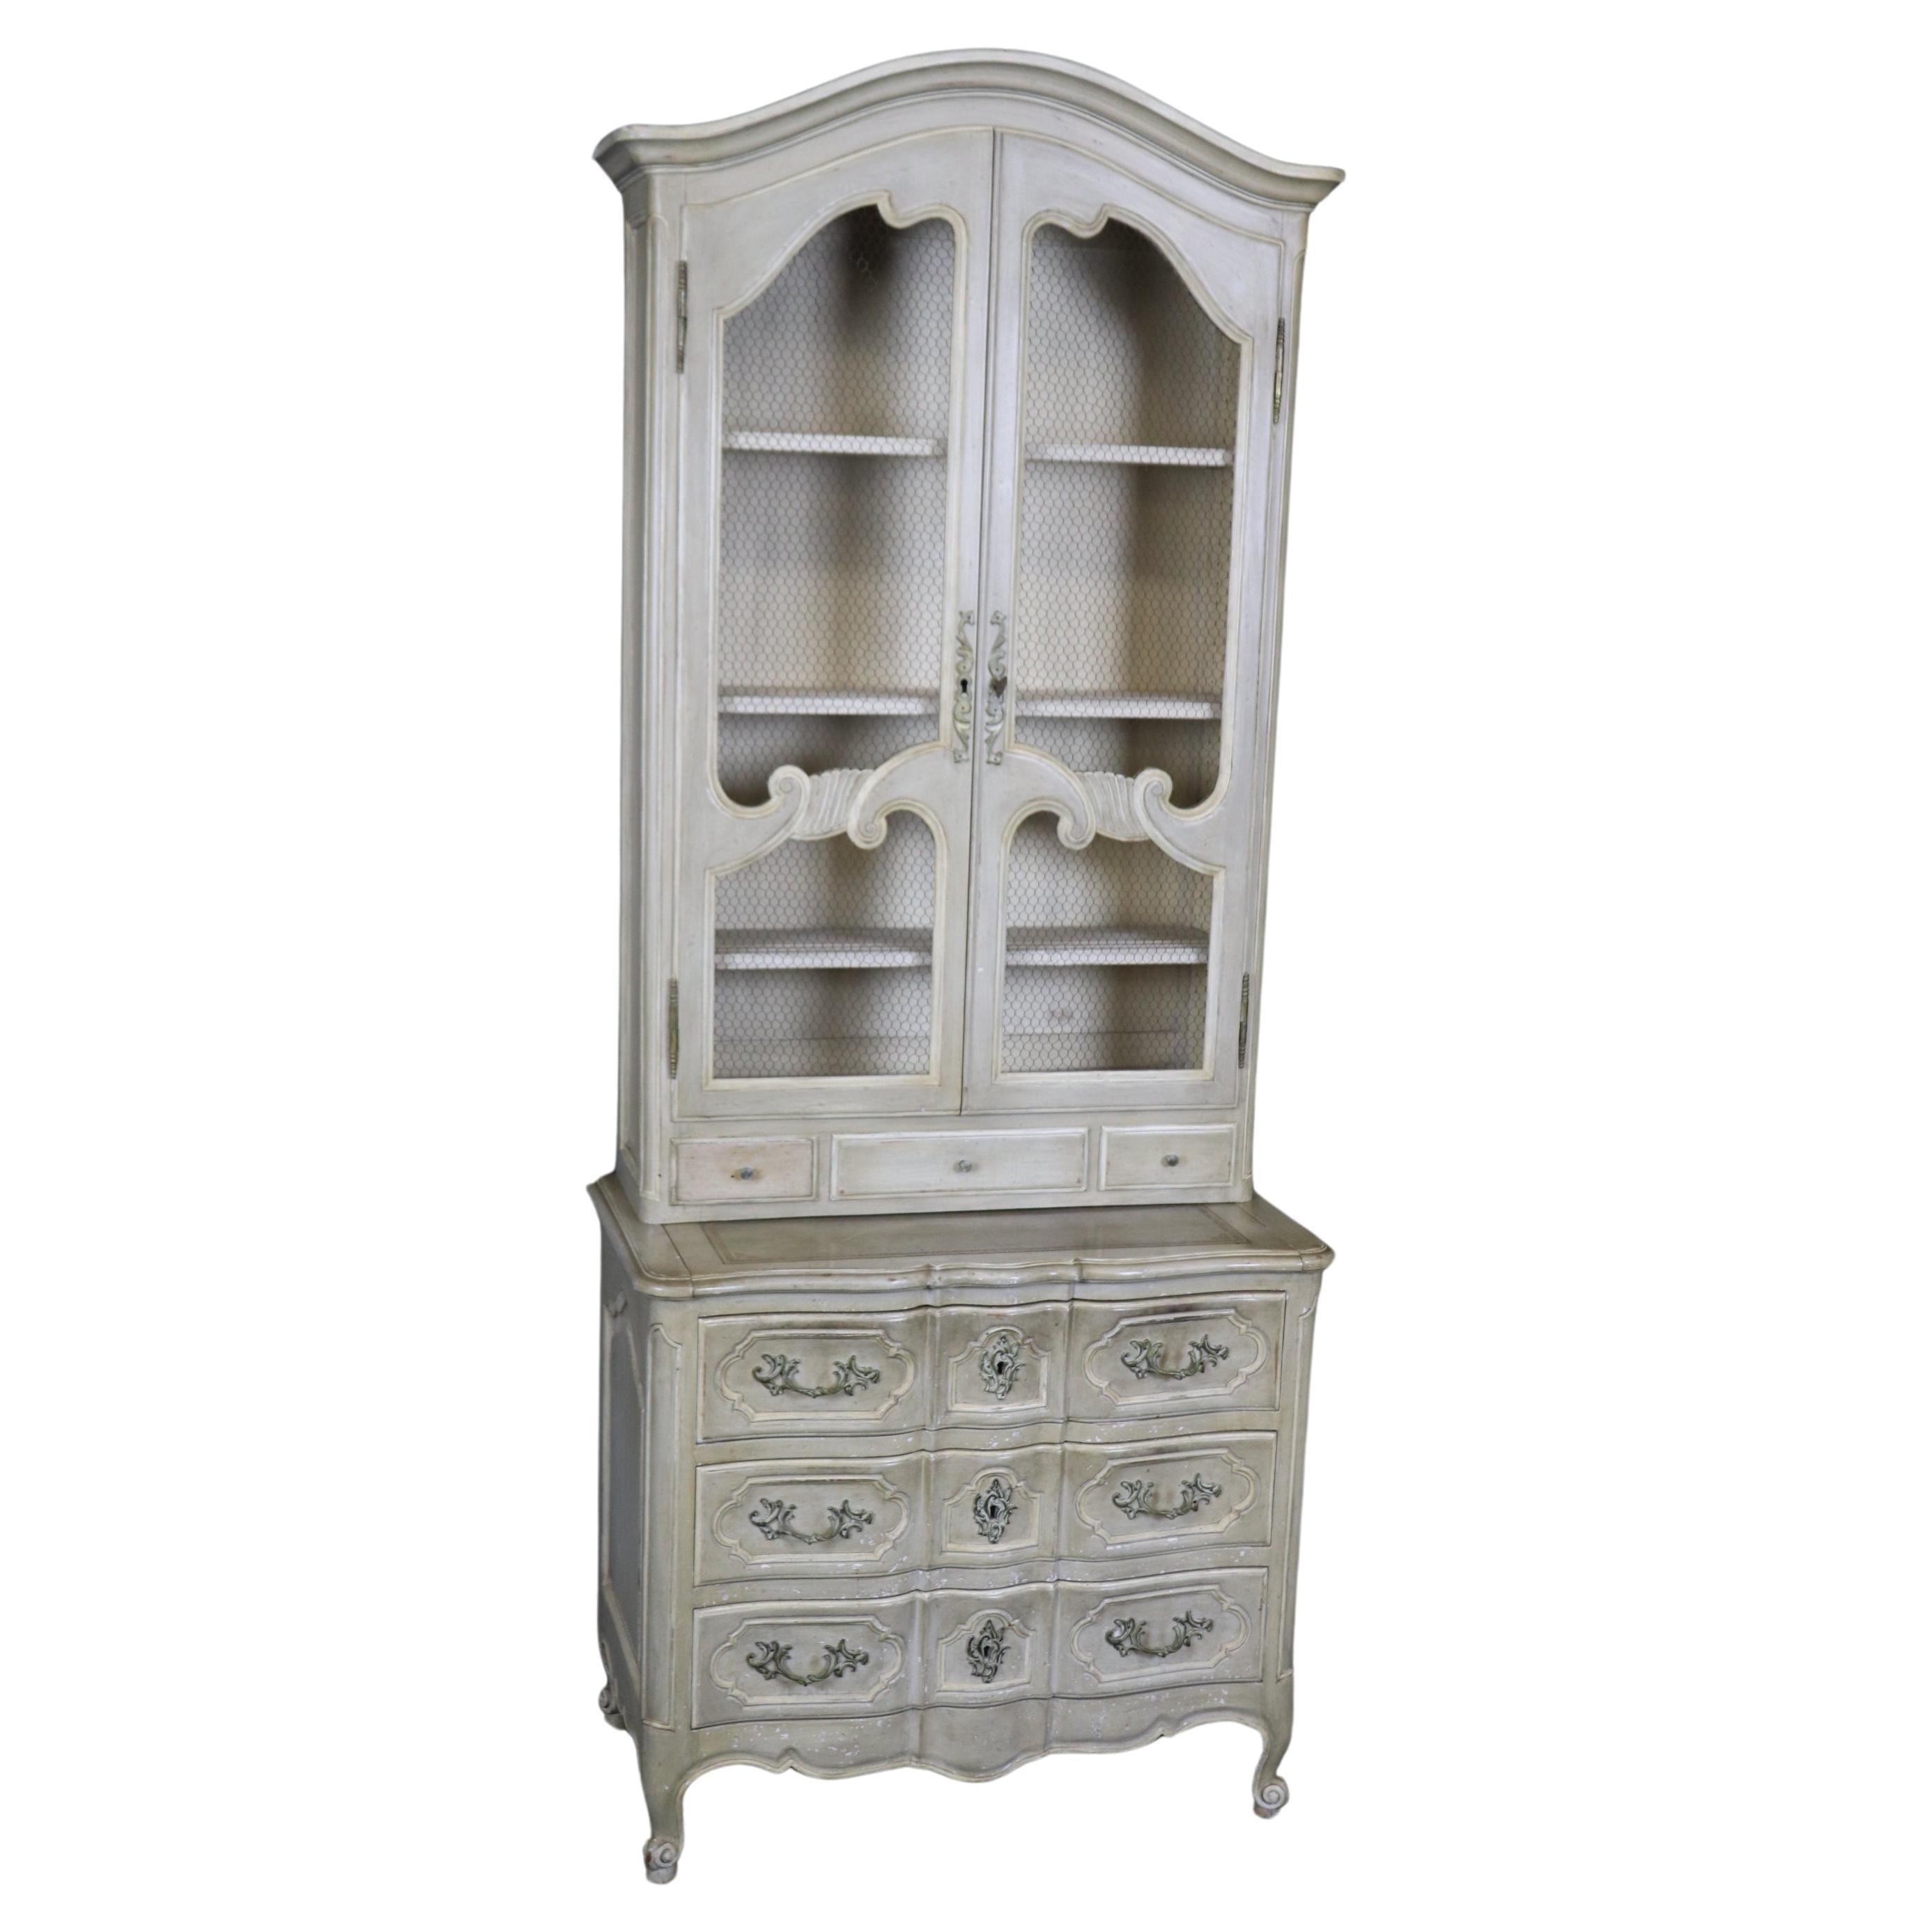 Superb Shallow Depth French Country Painted Mesh Door Secretary Desk  For Sale